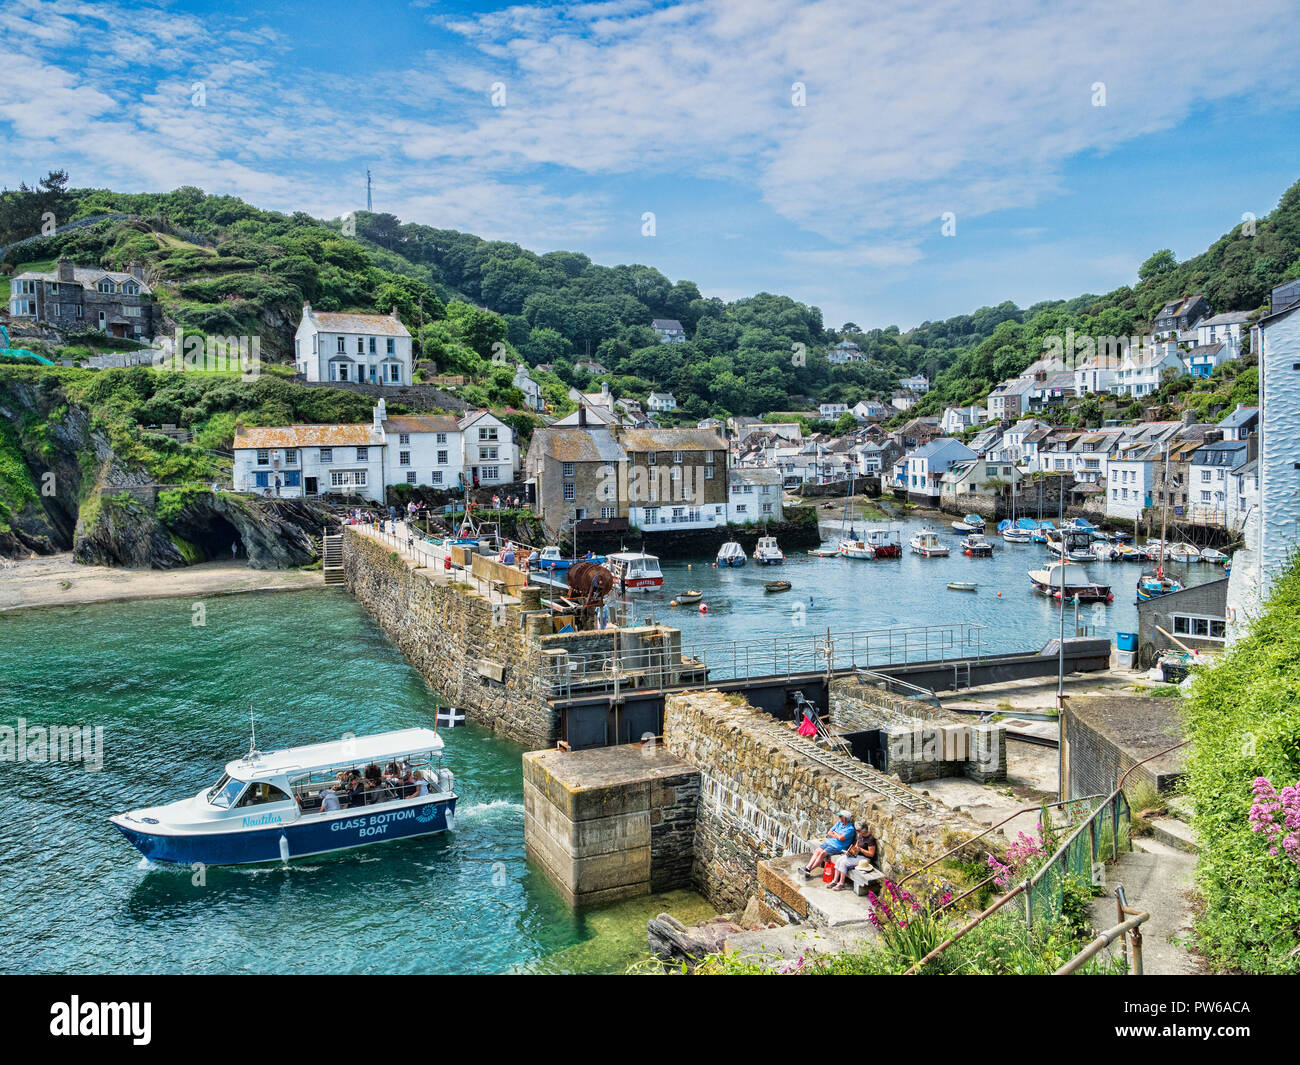 6 June 2018: Polperro, Cornwall, UK - One of the most beautiful villages in Cornwall, on an idyllic summer day, with a boat just leaving the harbour. Stock Photo